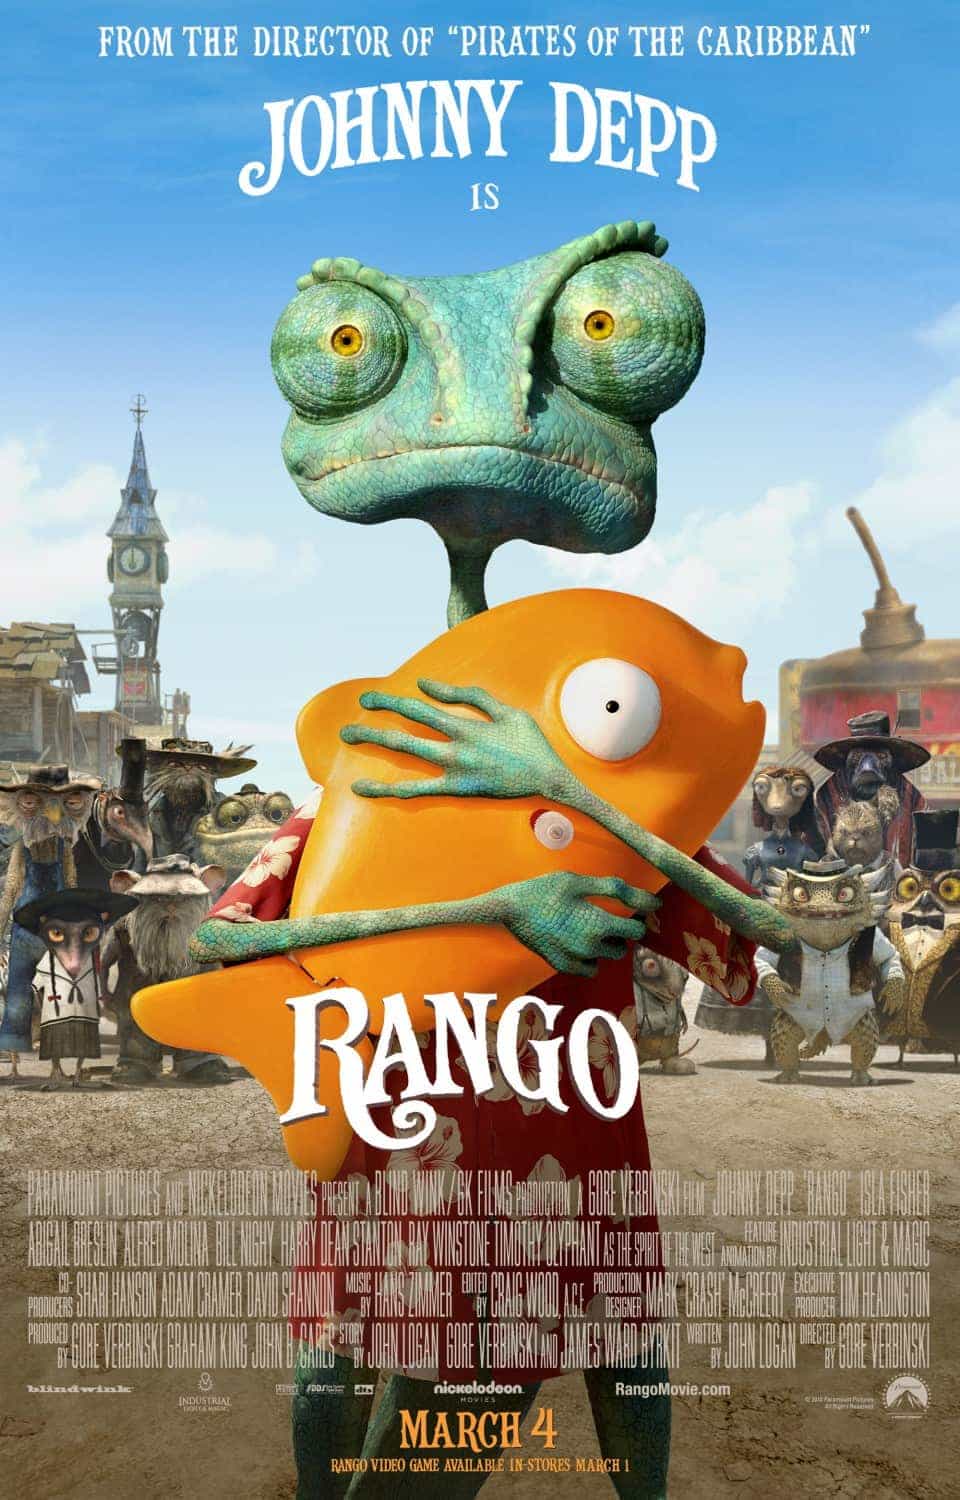 UK Box Office Weekend Report 4th - 6th March 2011: Rango makes its debut at the top of the box office